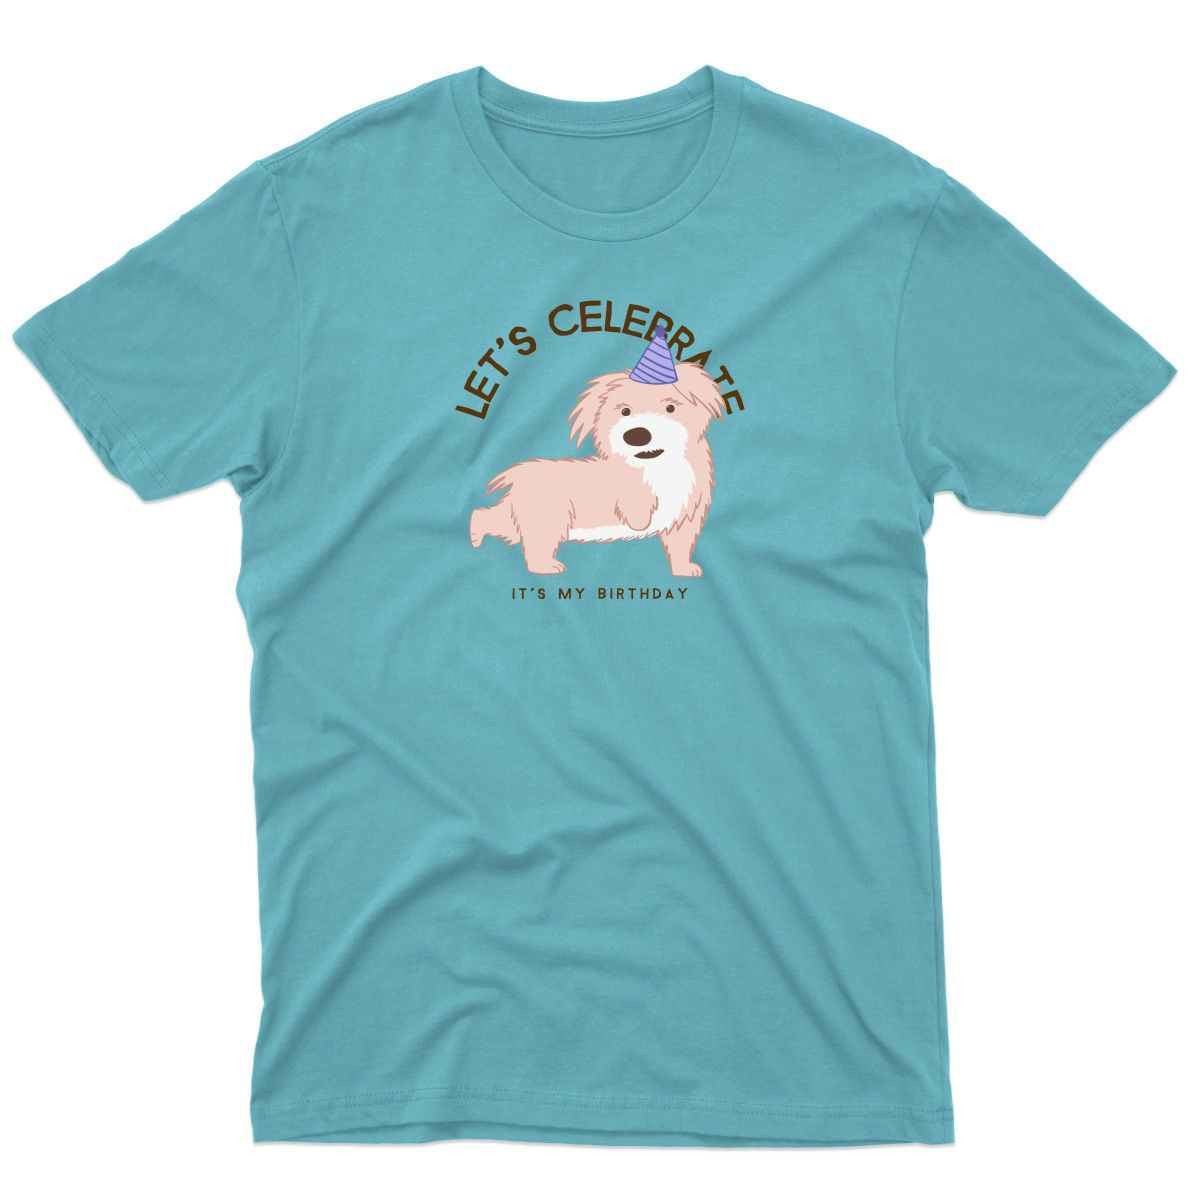 Let's Celebrate It is My Birthday Men's T-shirt | Turquoise